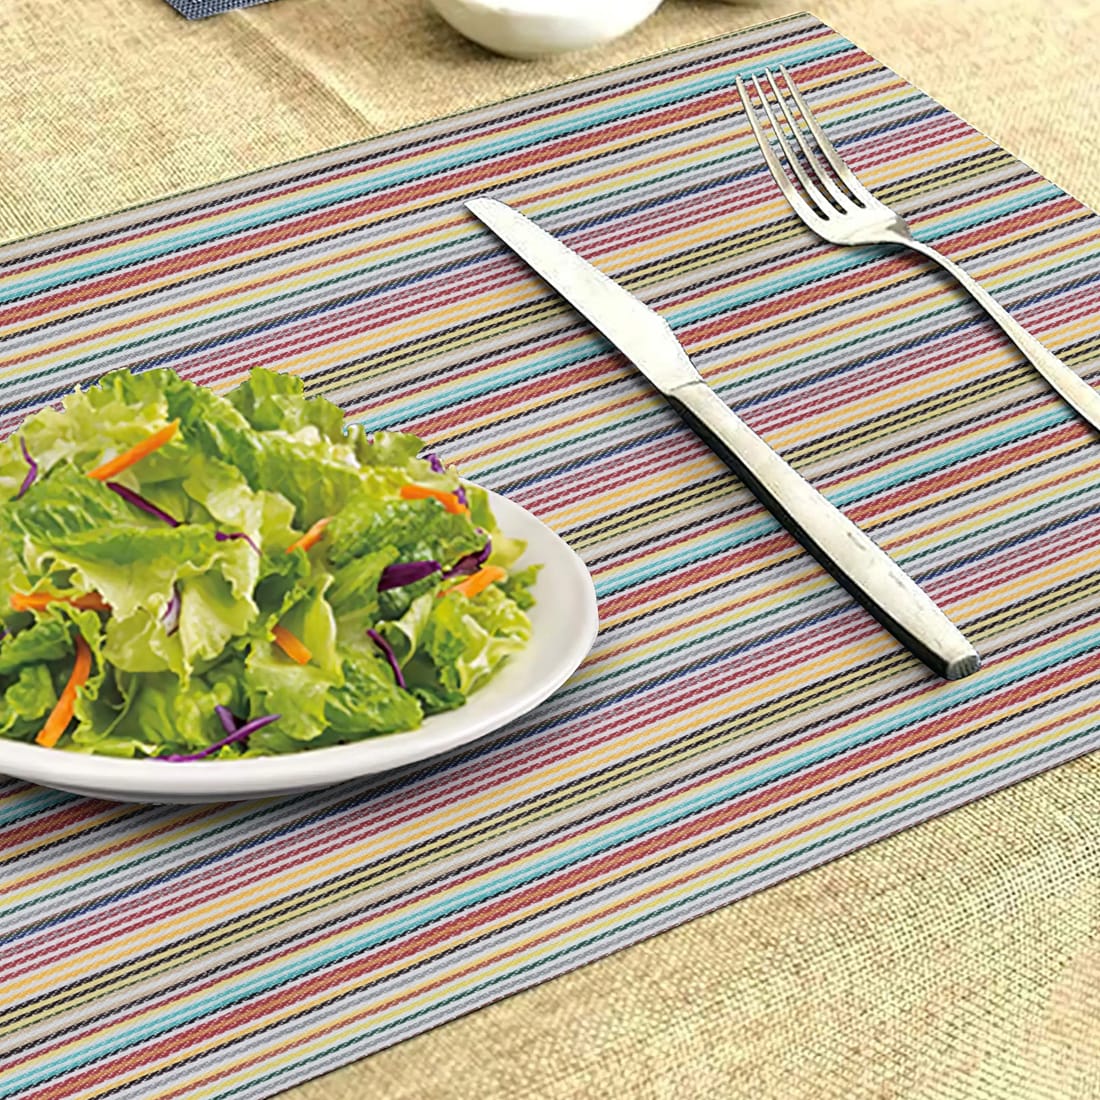 AURAVE Hand Woven Cotton Table Placemats Set of 6